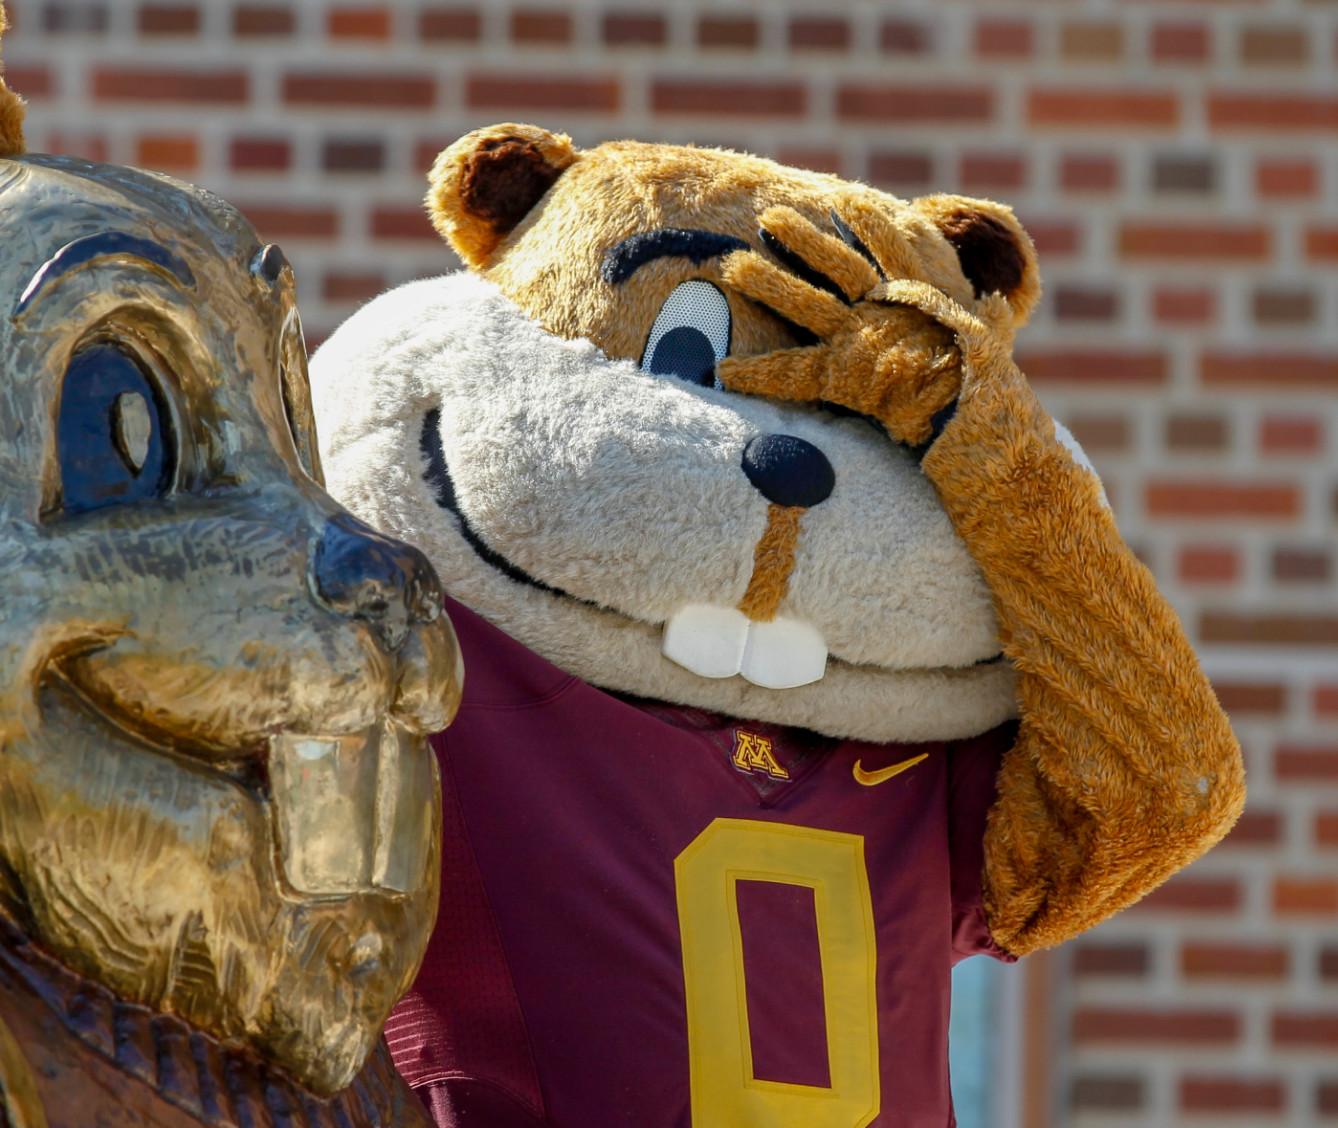 Goldy Gopher stands next to a Goldy statue while looking embarassed